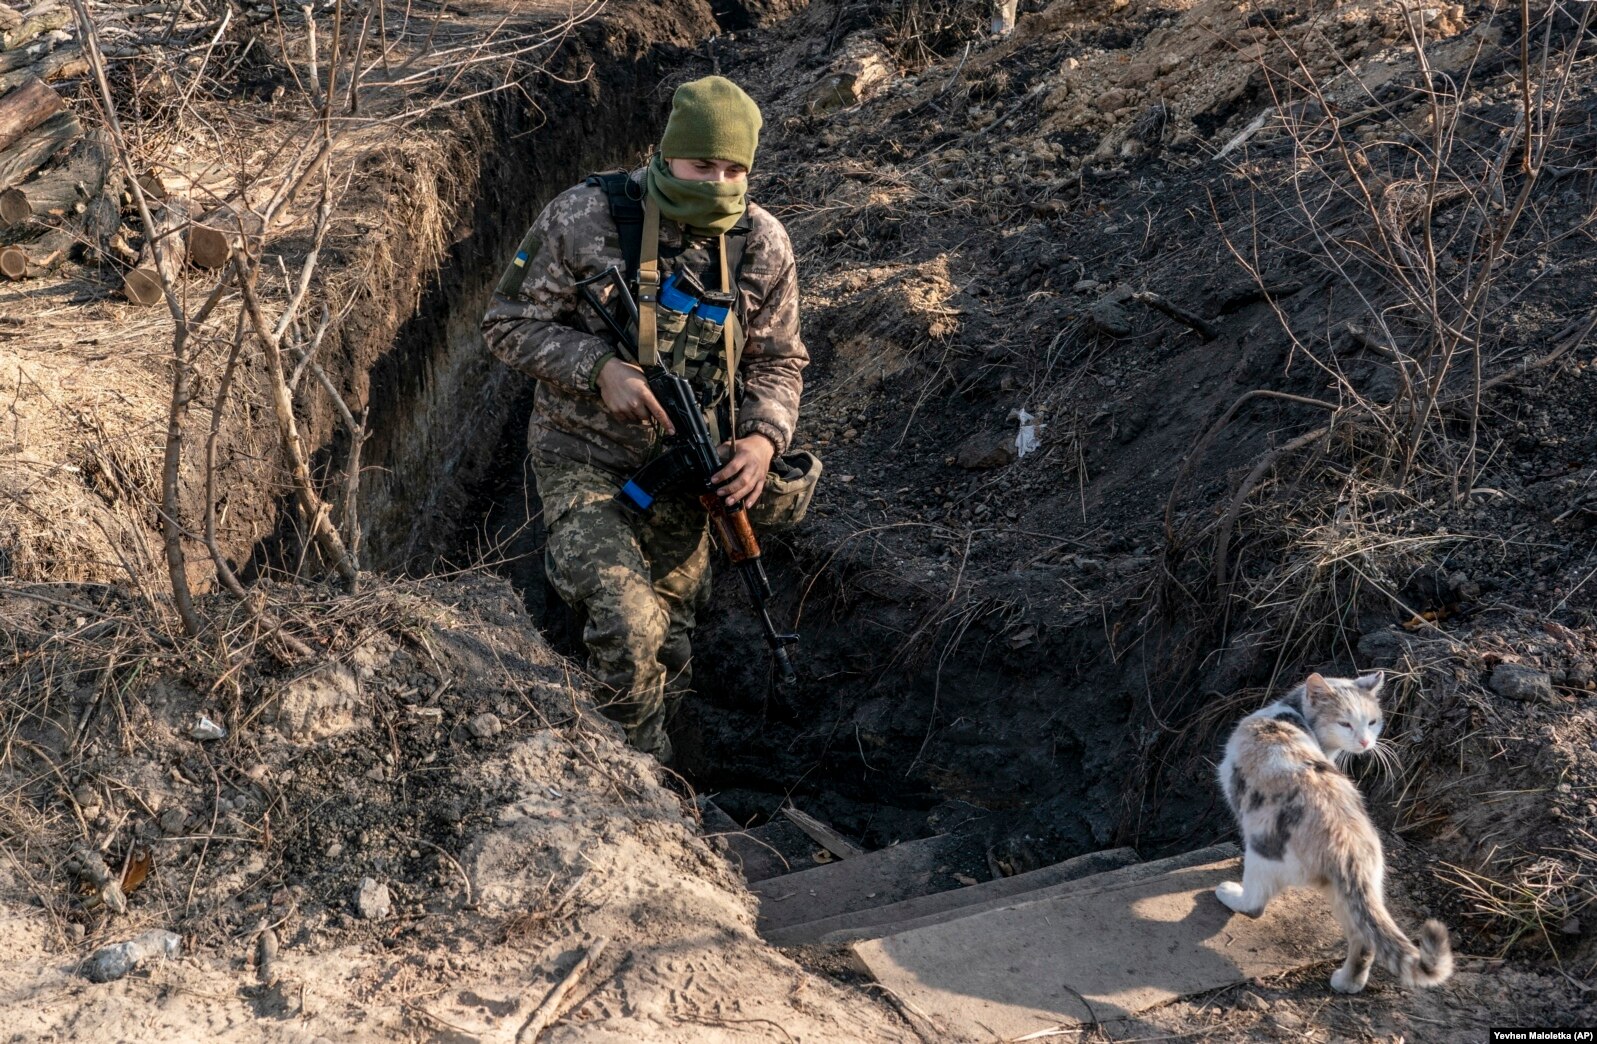 A Ukrainian soldier at the line of contact in Zolote in Ukraine's eastern Luhansk region on November 2. More than 13,000 civilians and combatants have been killed in the fighting.